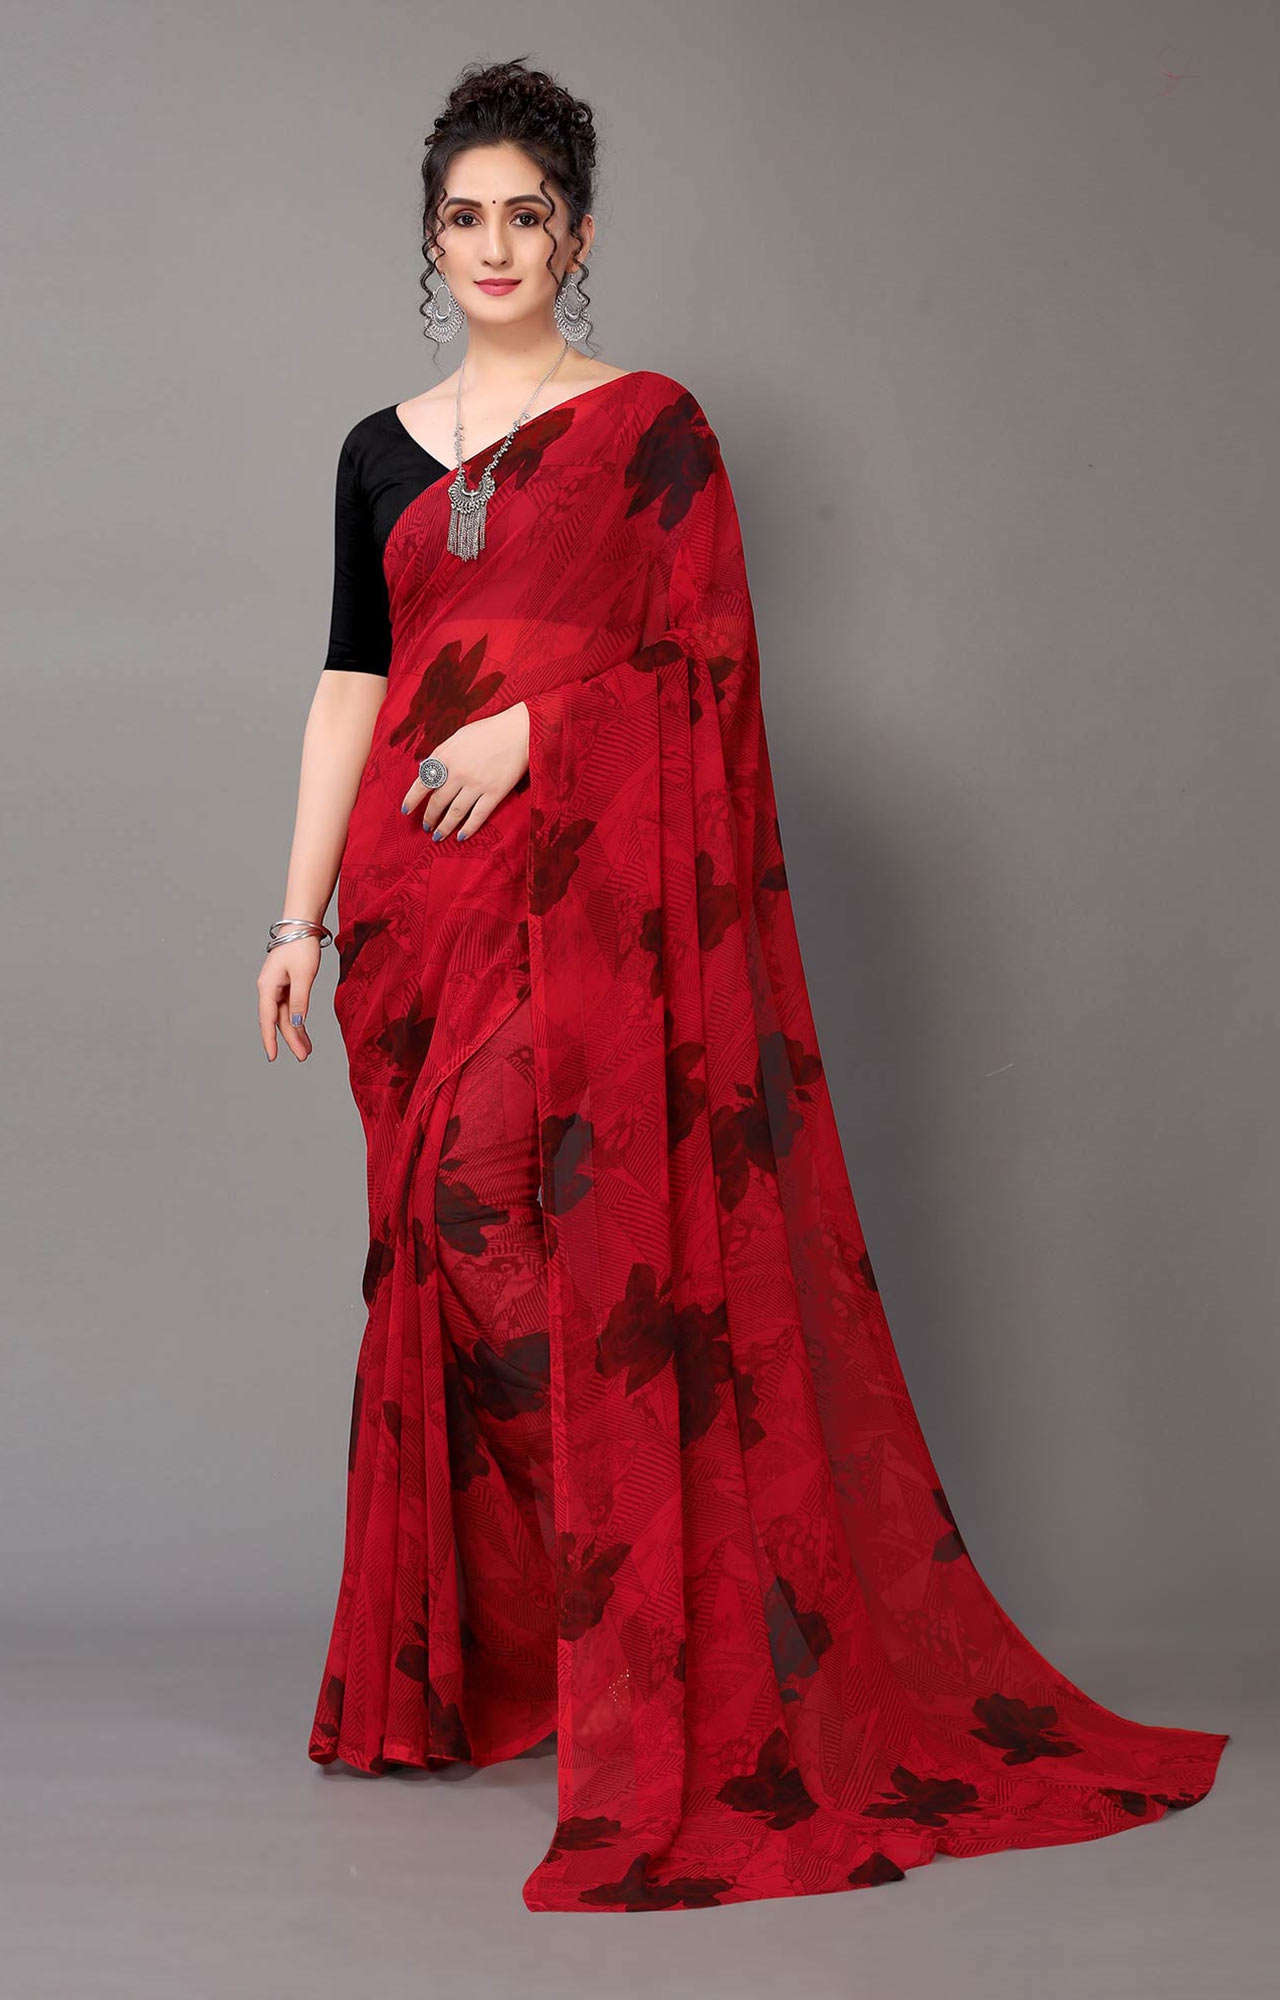 Women Daily Wear Red Floral Printed Georgette Saree - HAL29GR00109RED